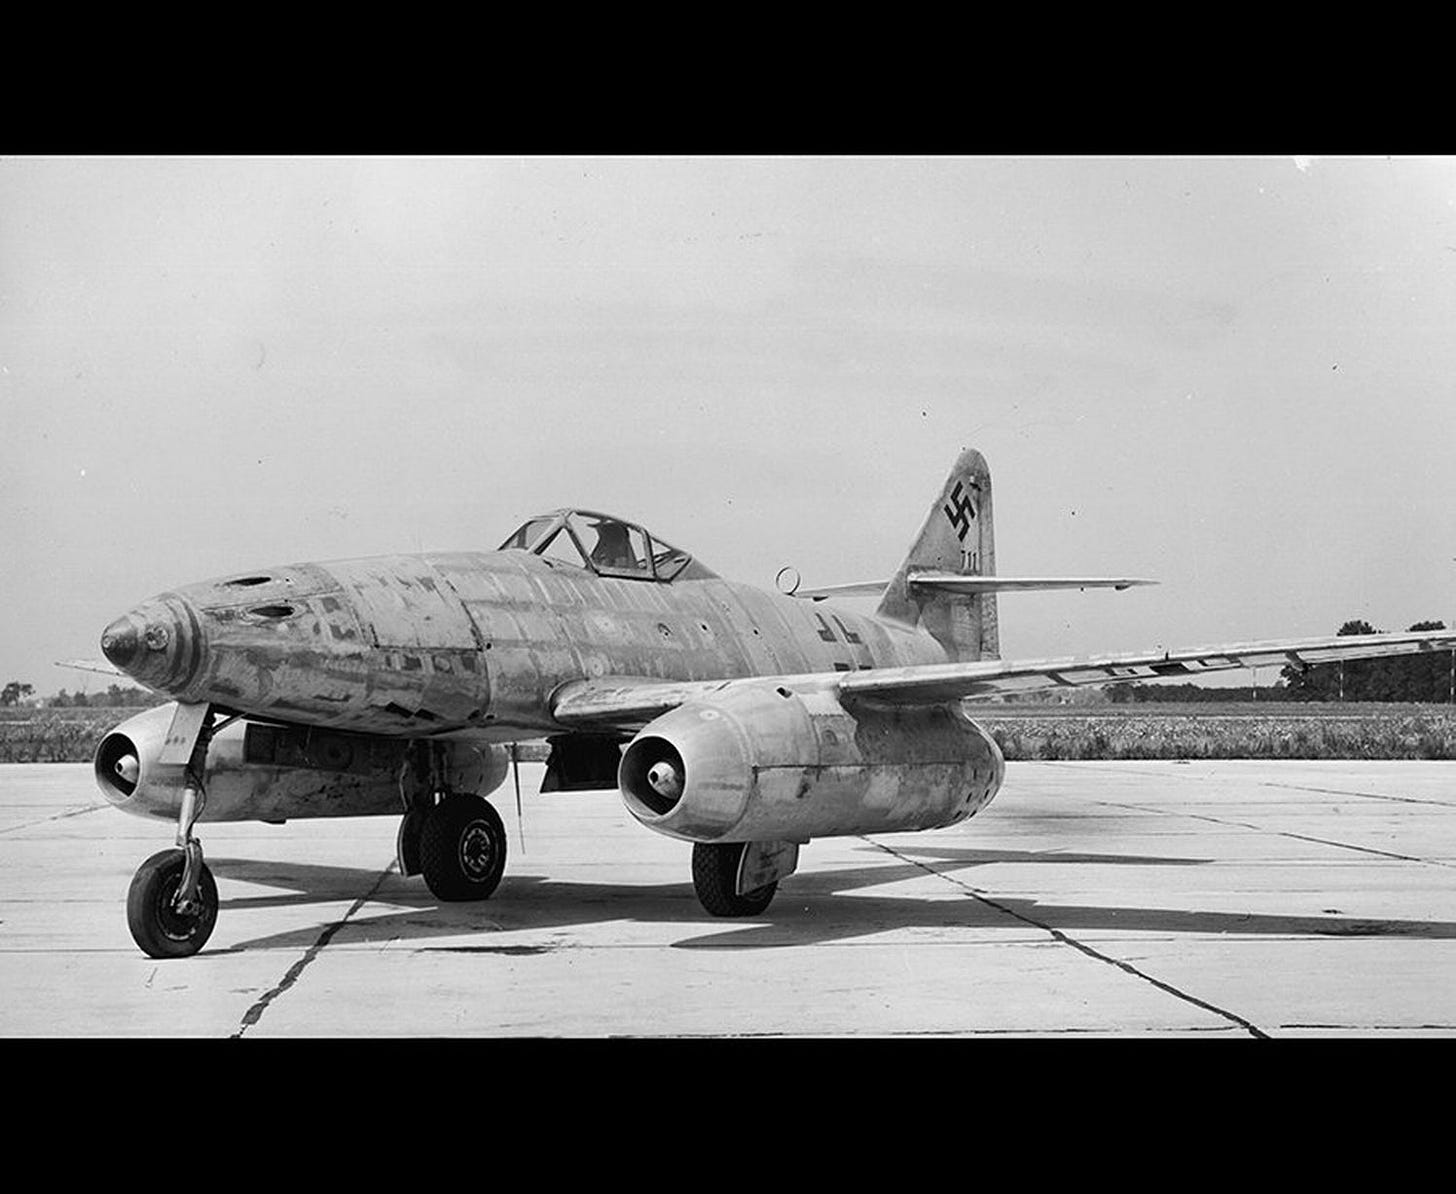 A captured Messerschmitt 262A-I sits on the runway of Wright Field in Ohio, where many of the captured scientists were based